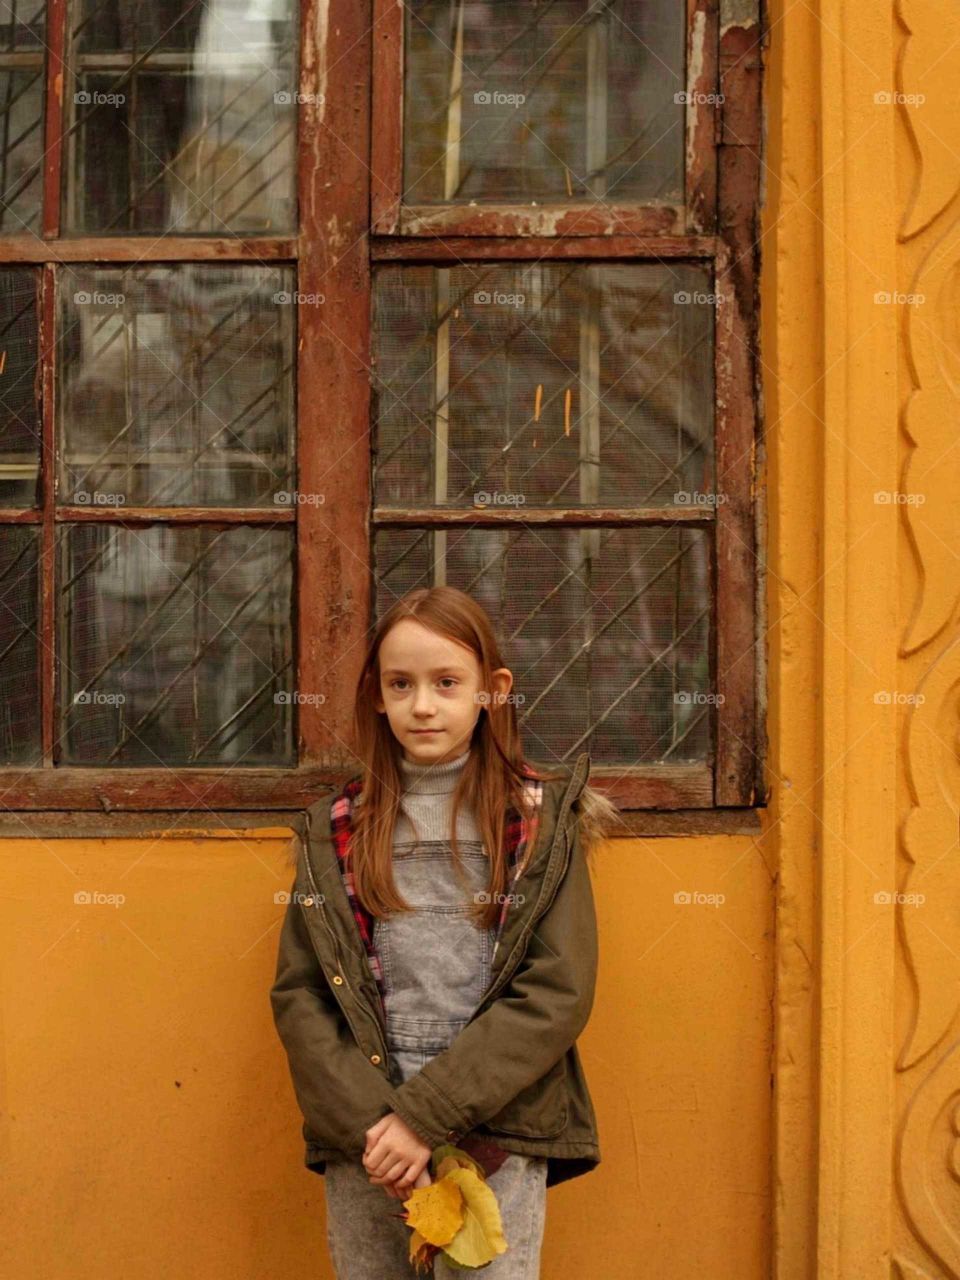 A girl stands next to a window in an old yellow house